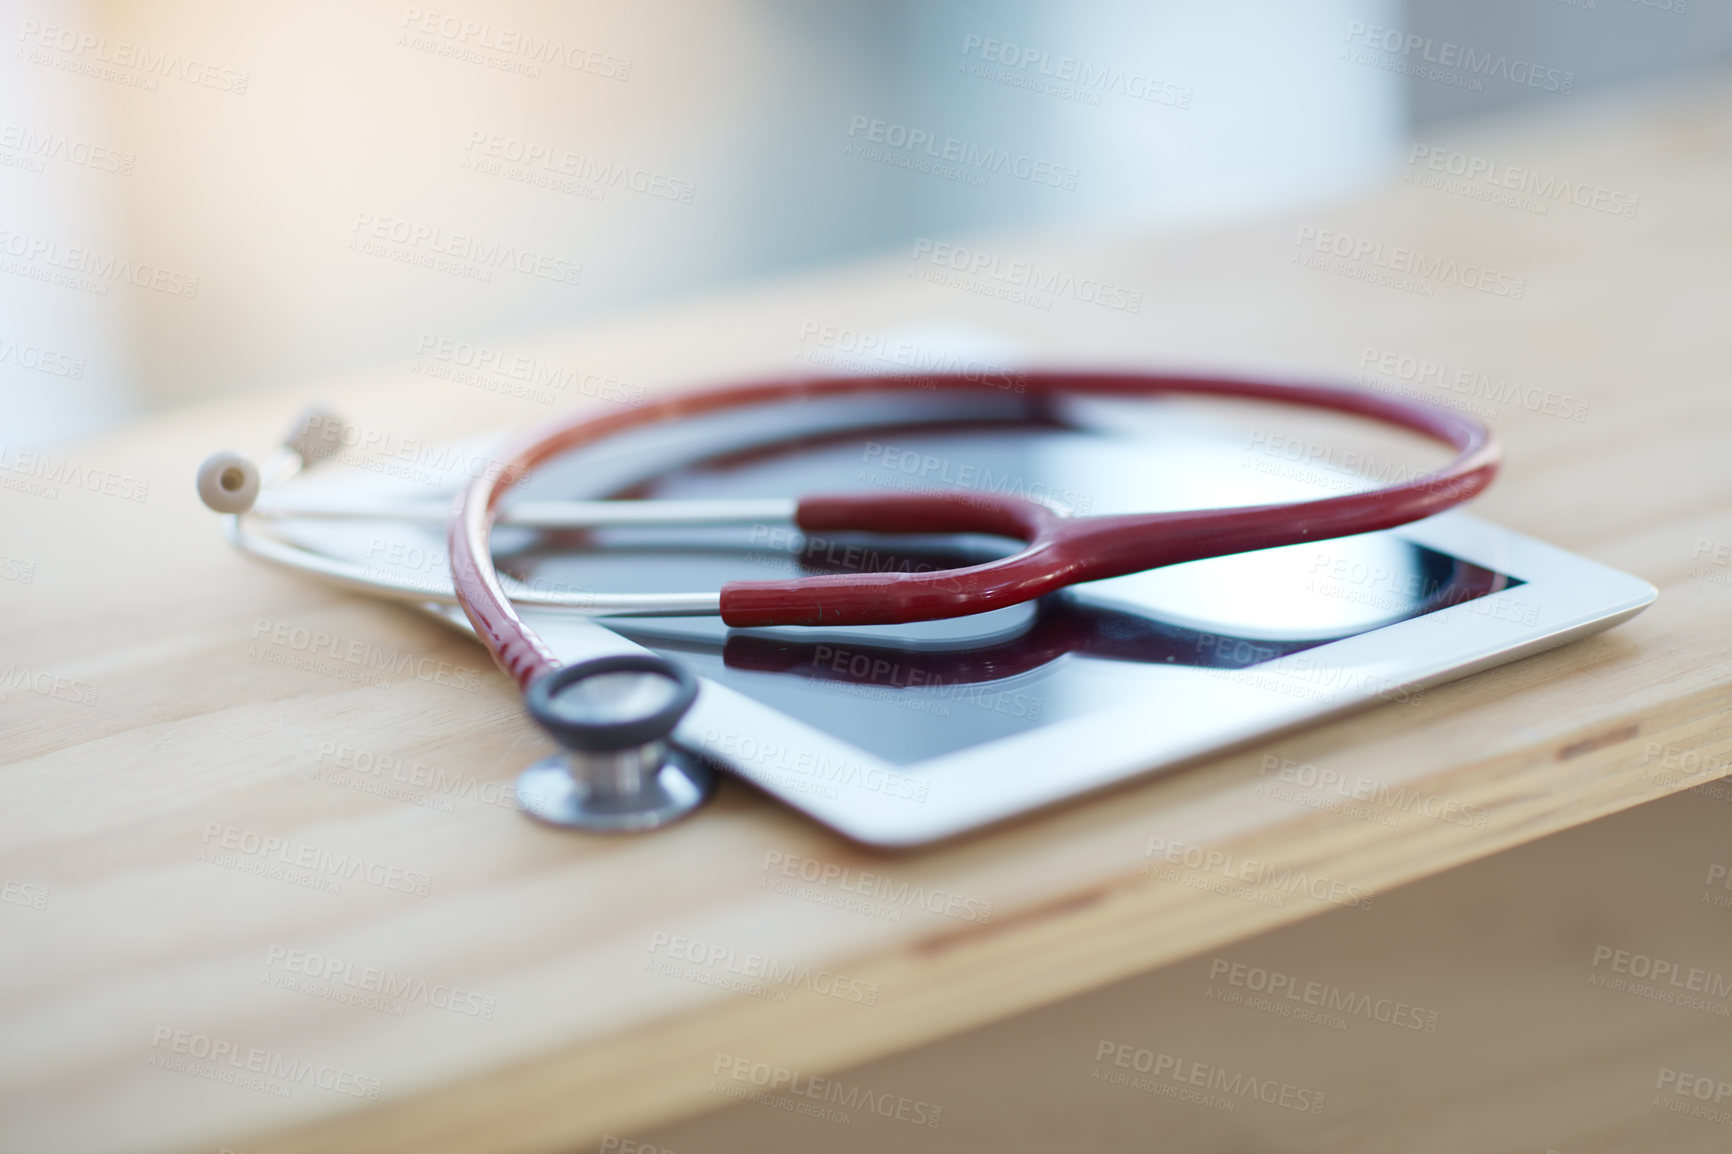 Buy stock photo Closeup shot of a digital tablet and a stethoscope on a table